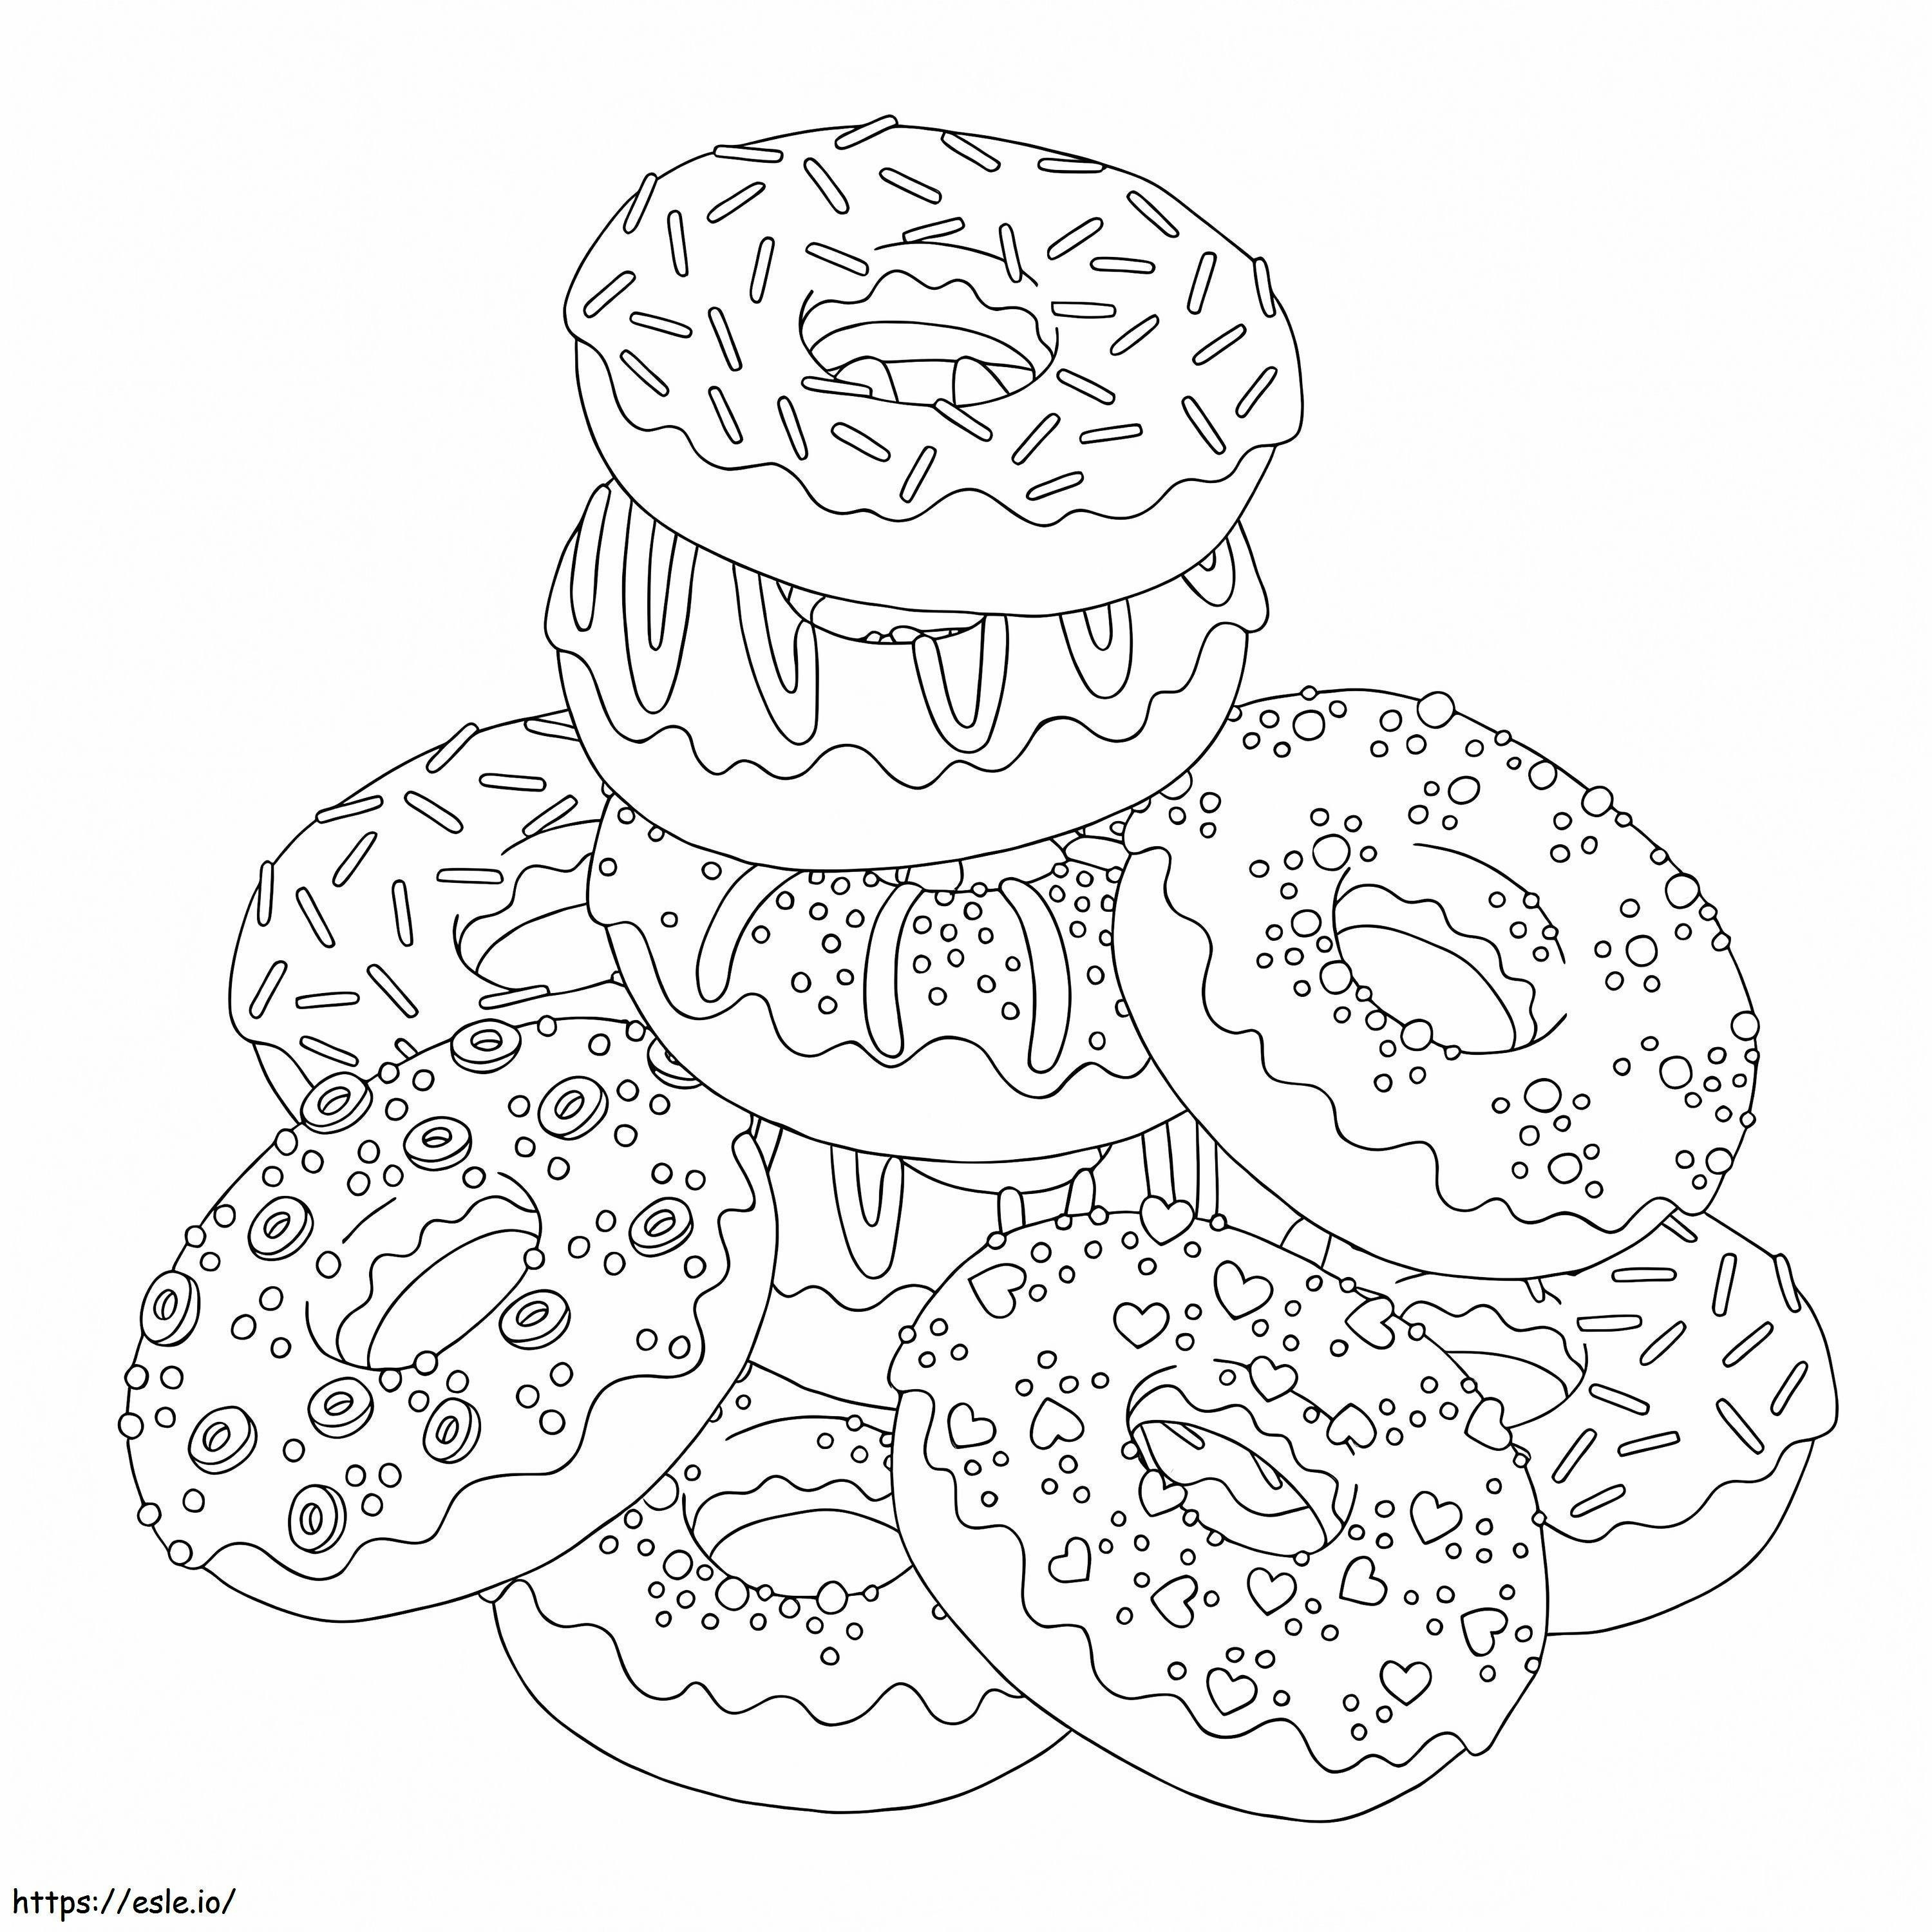 Cute Donut coloring page